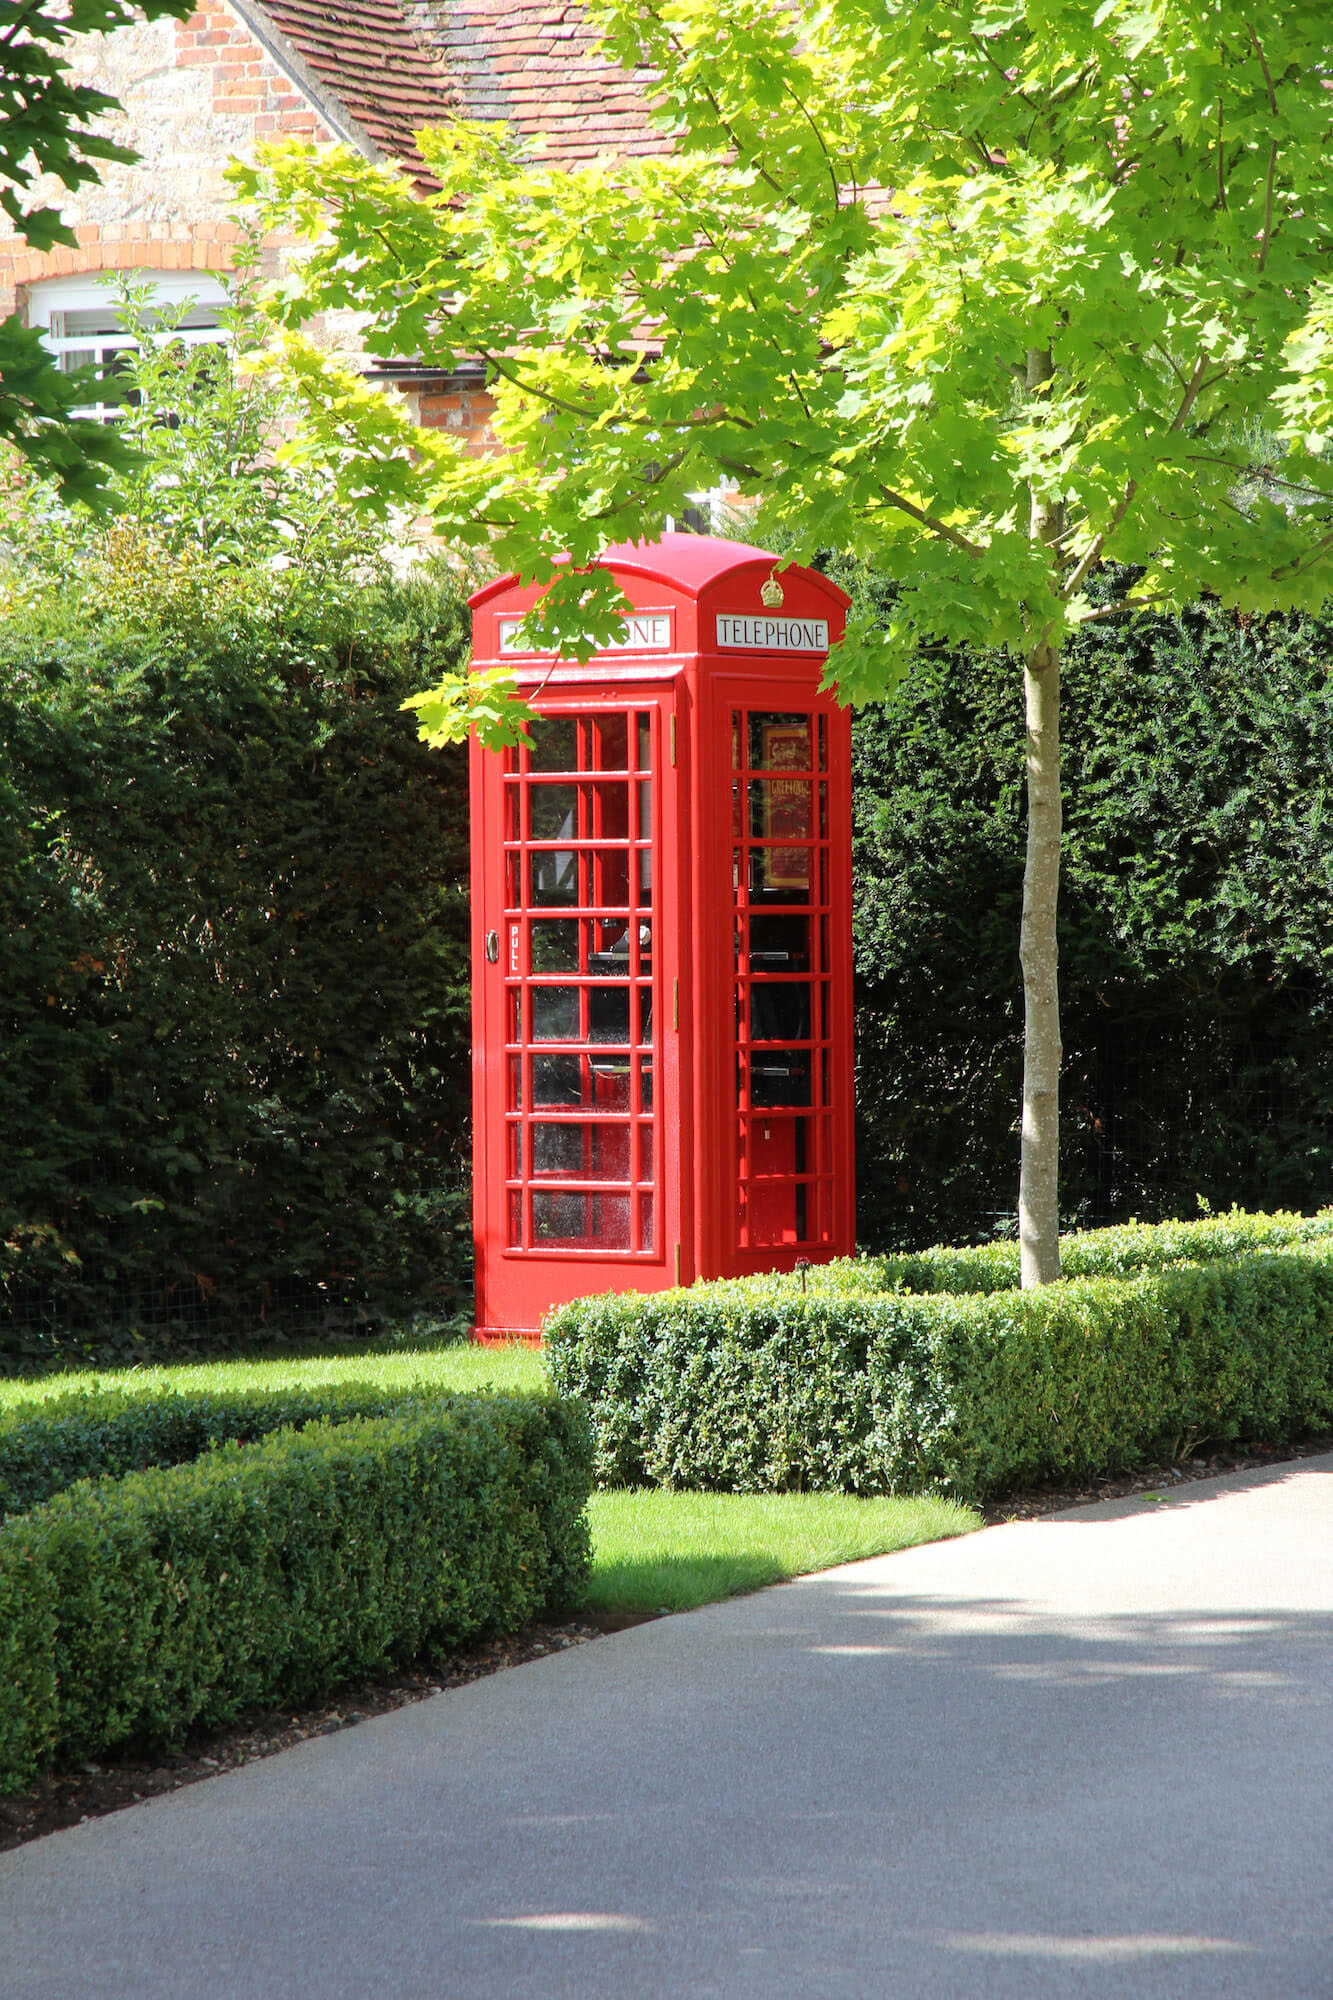 Traditional telephone box in driveway of british garden